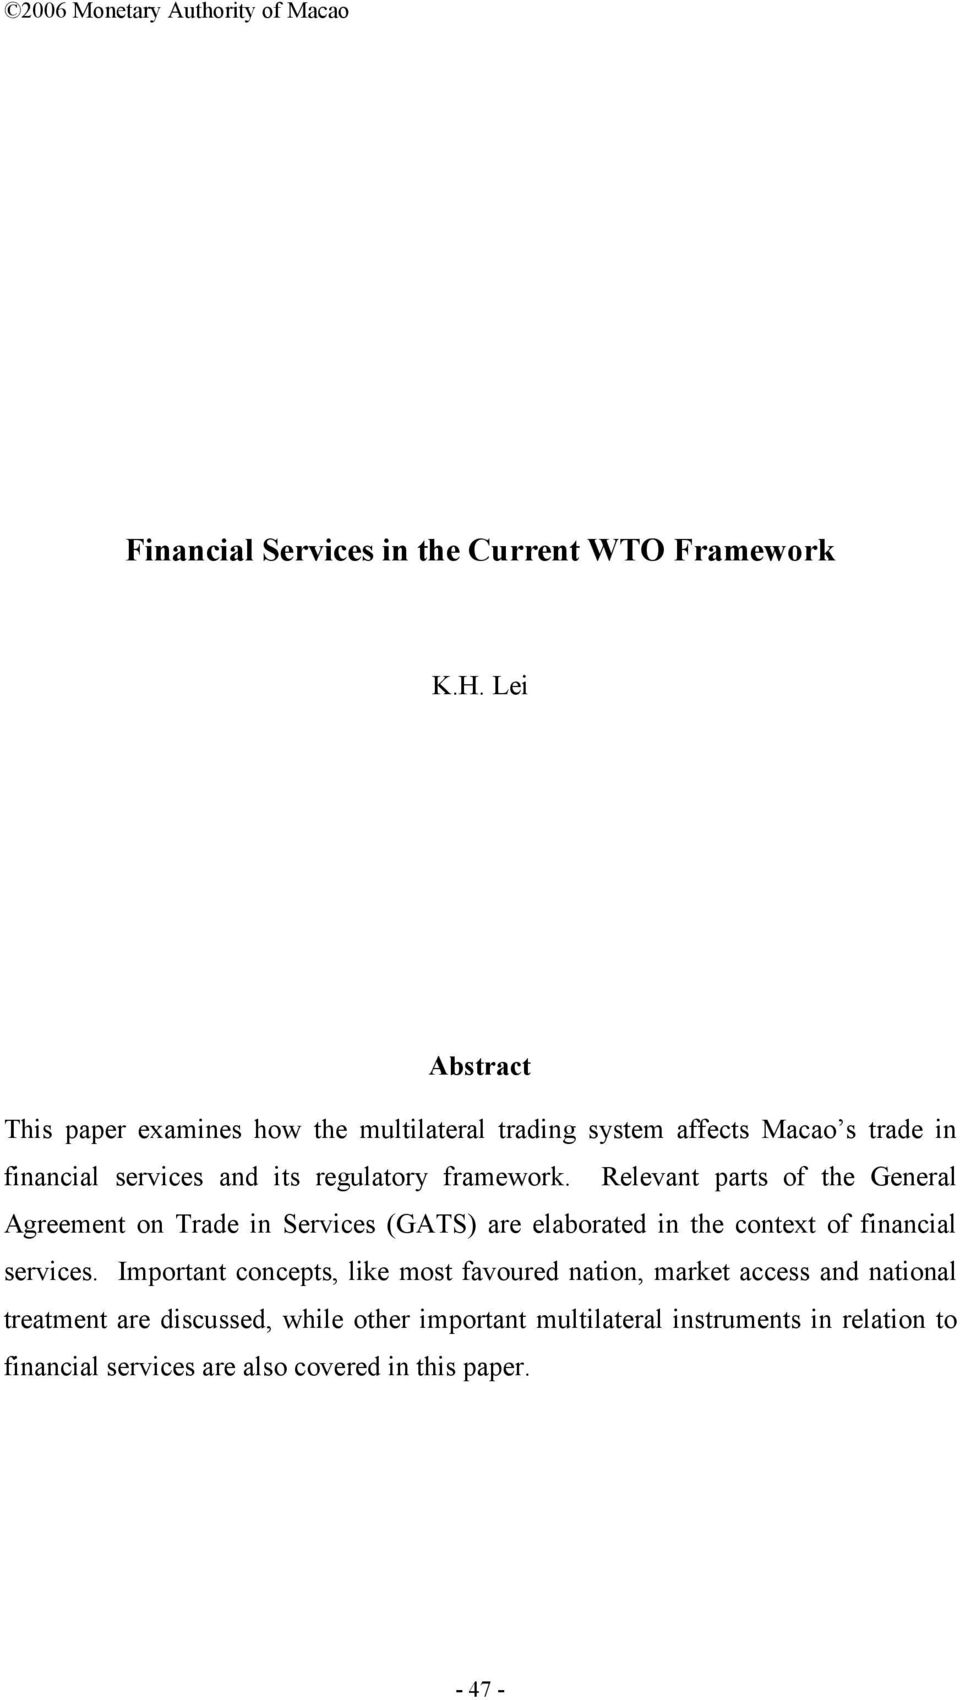 Relevant parts of the General Agreement on Trade in Services (GATS) are elaborated in the context of financial services.